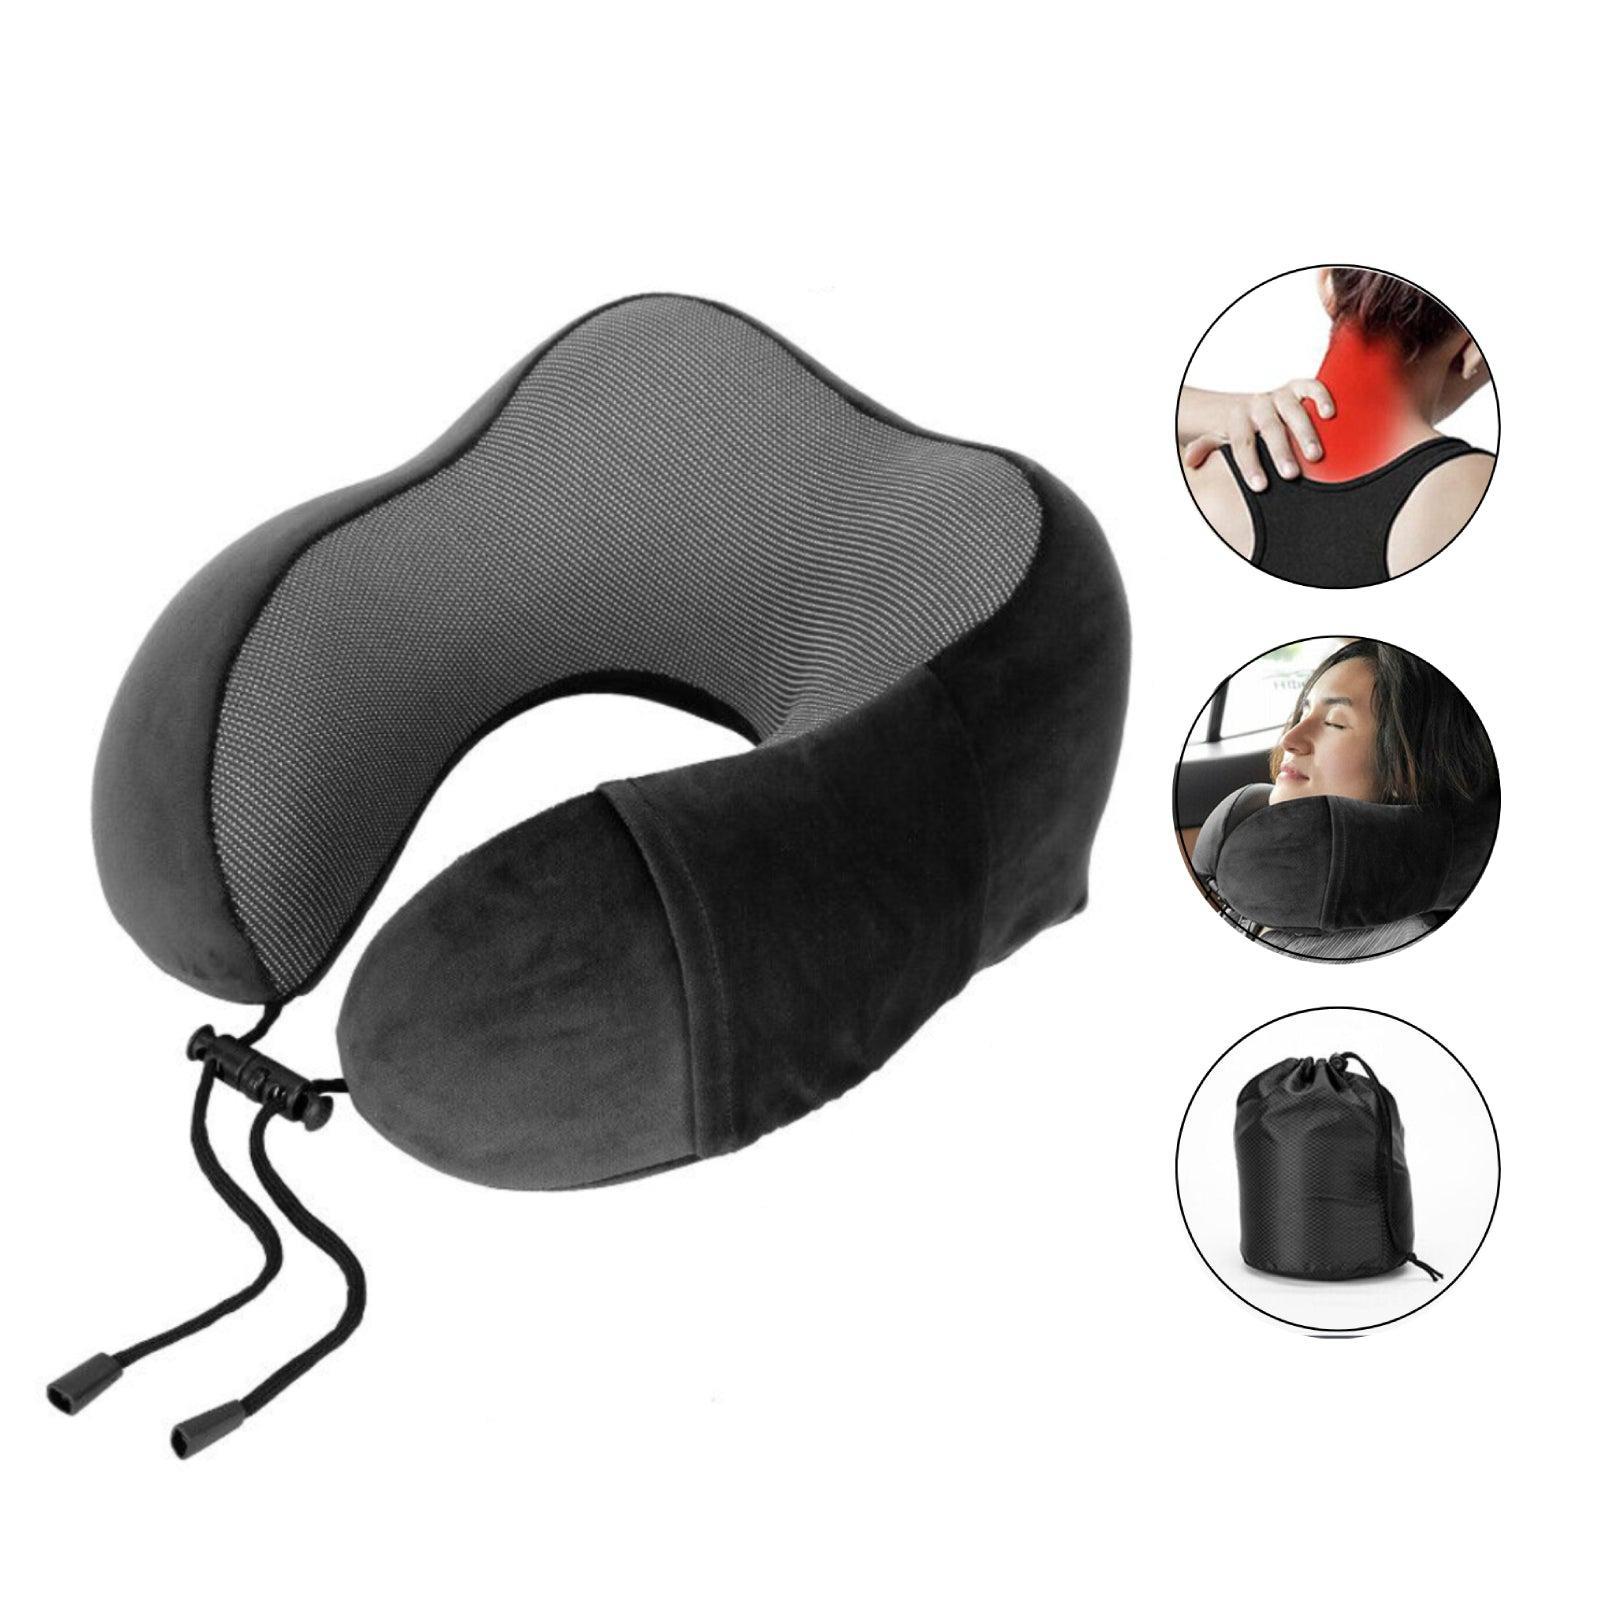 Portable U Shaped Travel Pillow Soft Comfortable Head Rest Cushion Neck Support